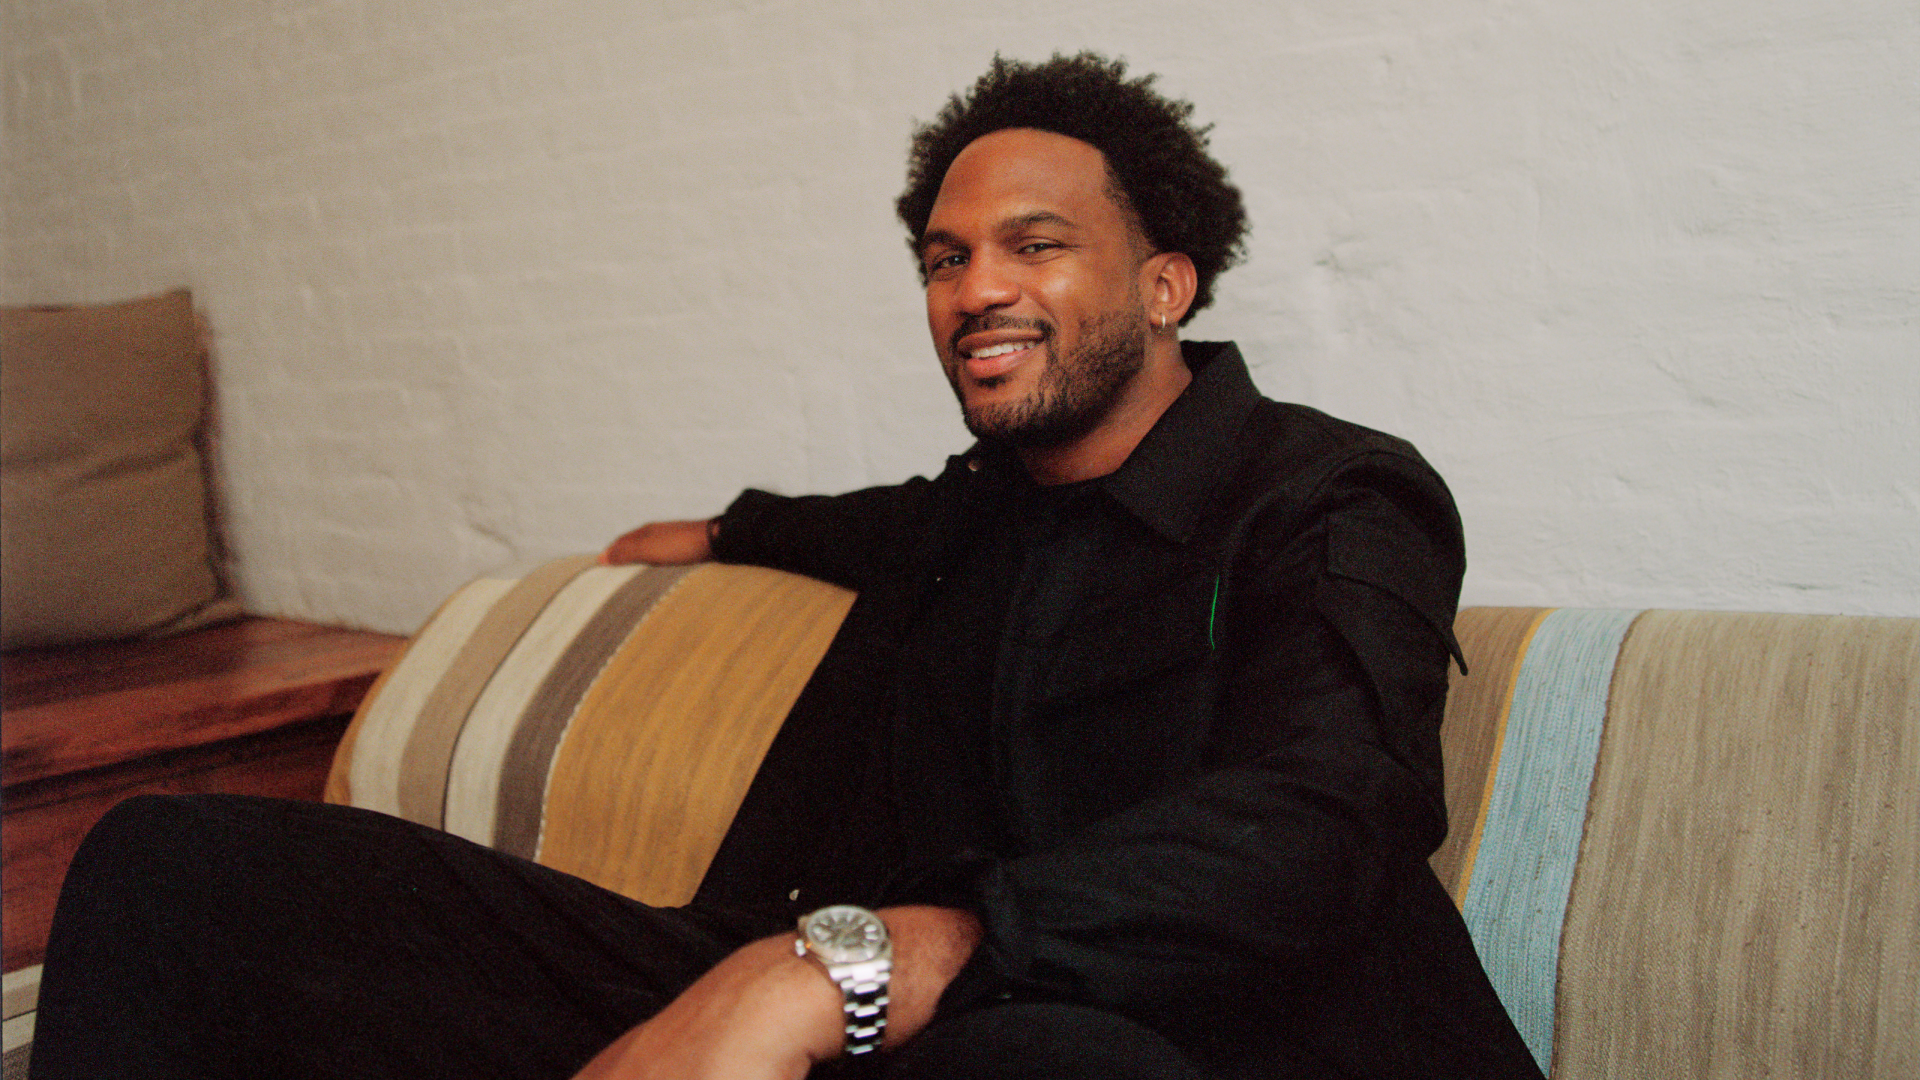 Kickstarter CEO Everette Taylor, wearing all black, sits on a couch and rests his left arm on his left knee. A watch is visible on his wrist.